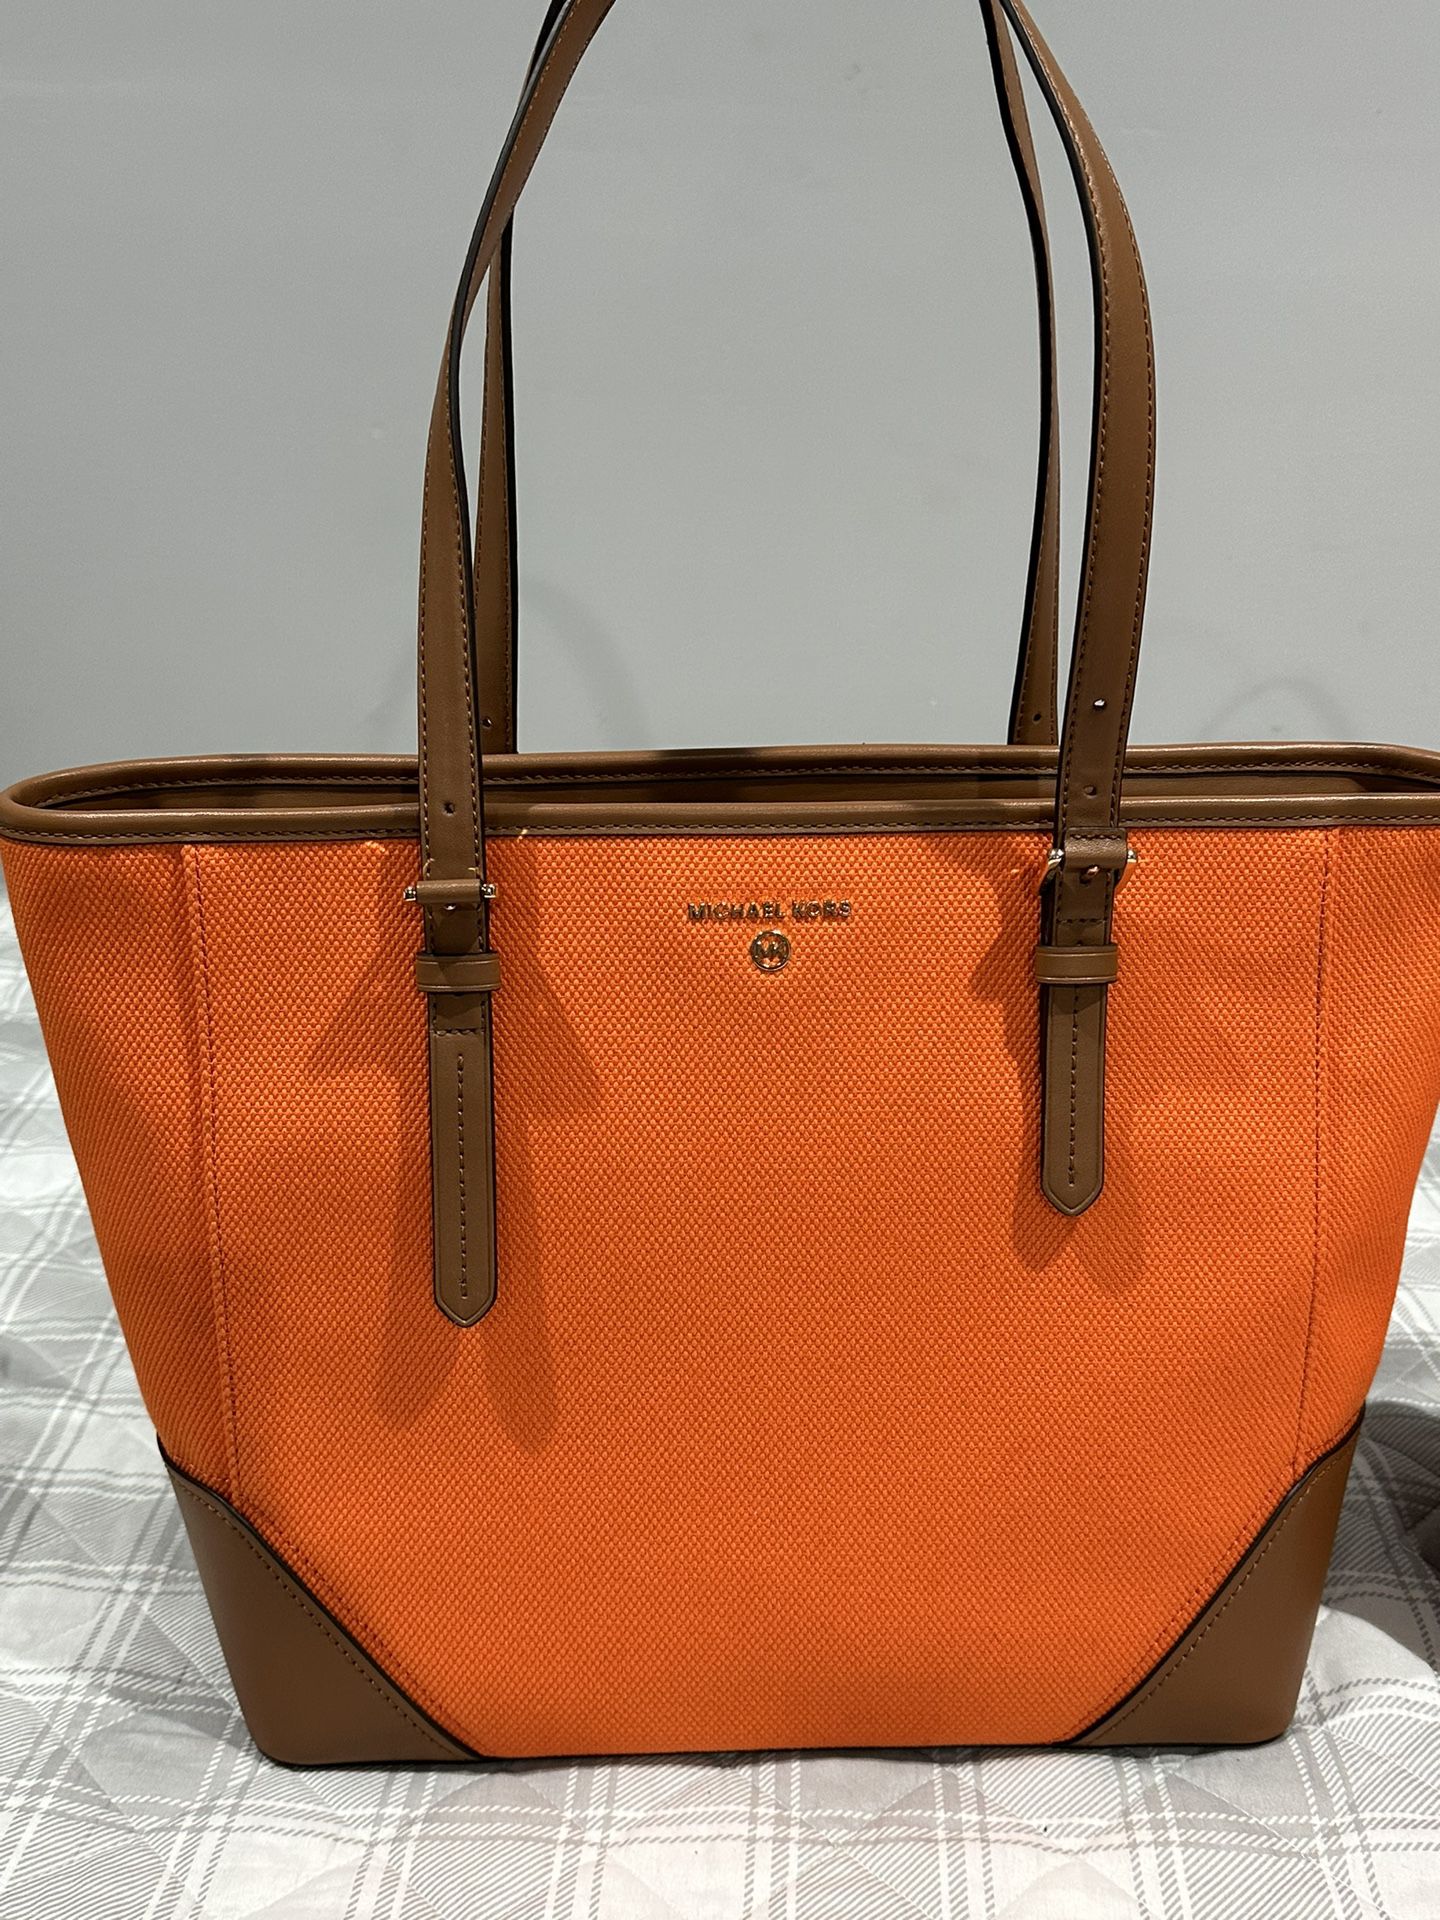 Michael Kors-Maisie Large Logo 3-in-1 Tote Bag for Sale in Shafter, CA -  OfferUp